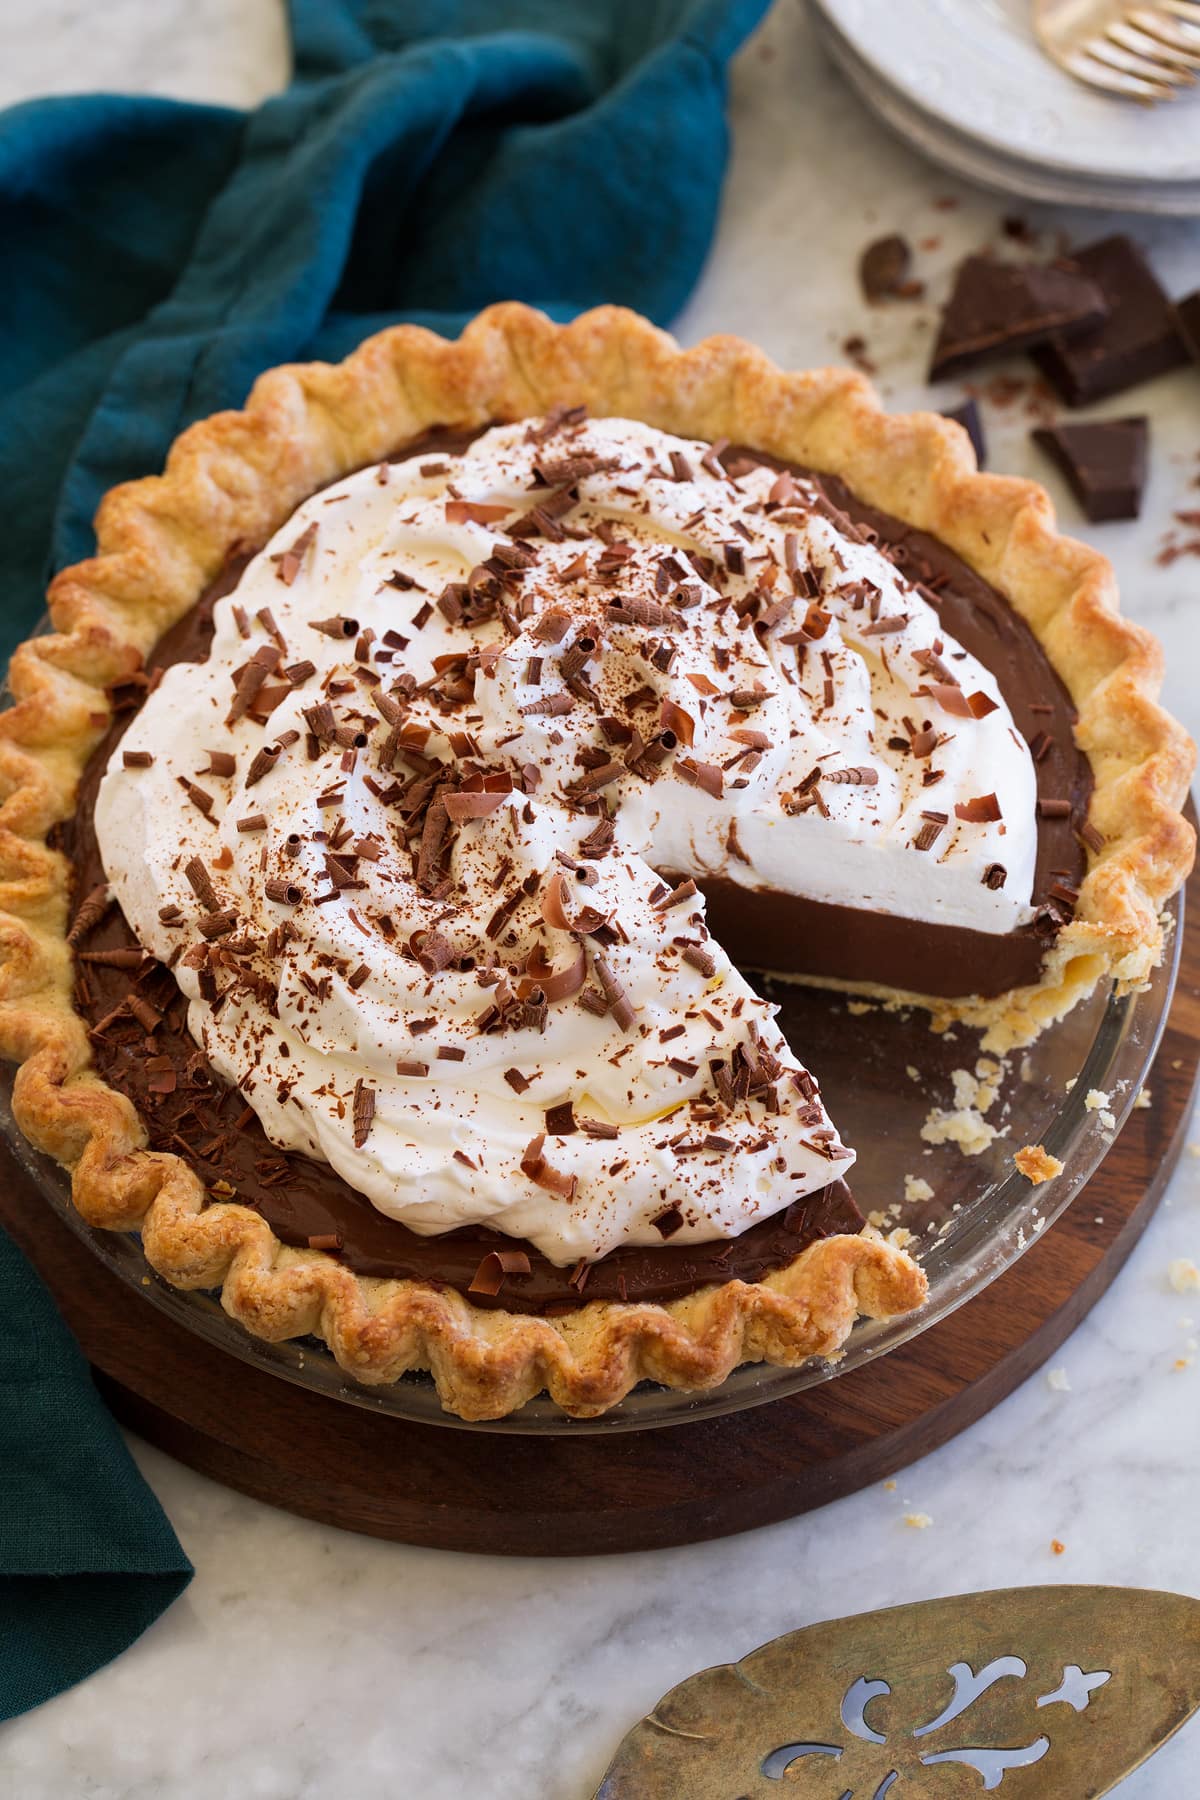 Whole chocolate cream pie decorated with fluffy whipped cream and chocolate curls. One slice is cut from the pie to show the filling.